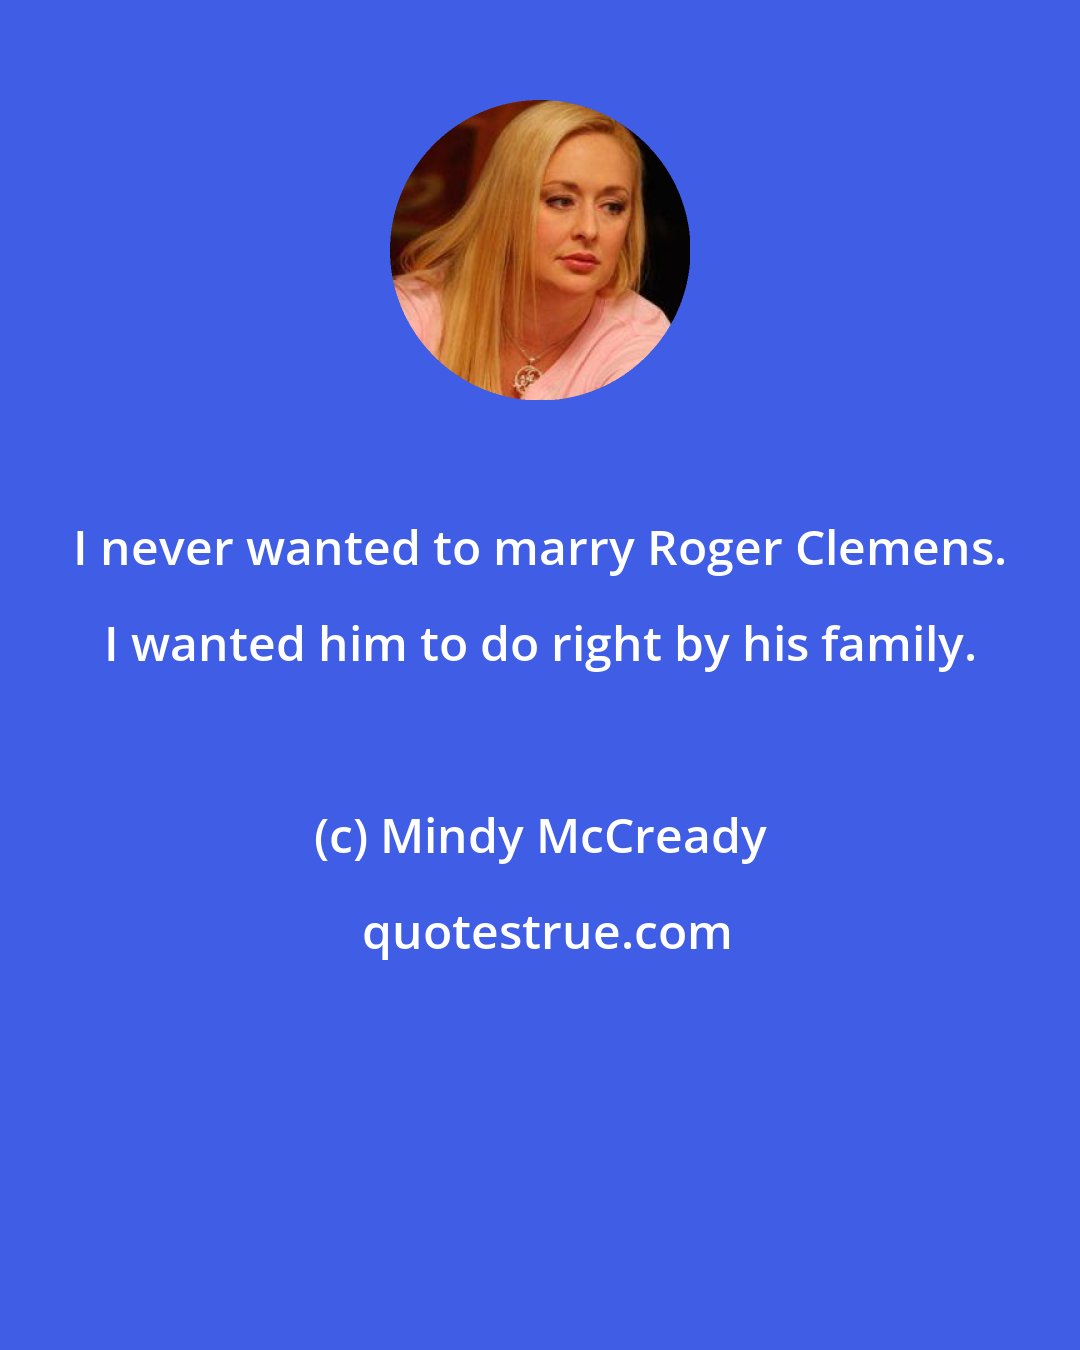 Mindy McCready: I never wanted to marry Roger Clemens. I wanted him to do right by his family.